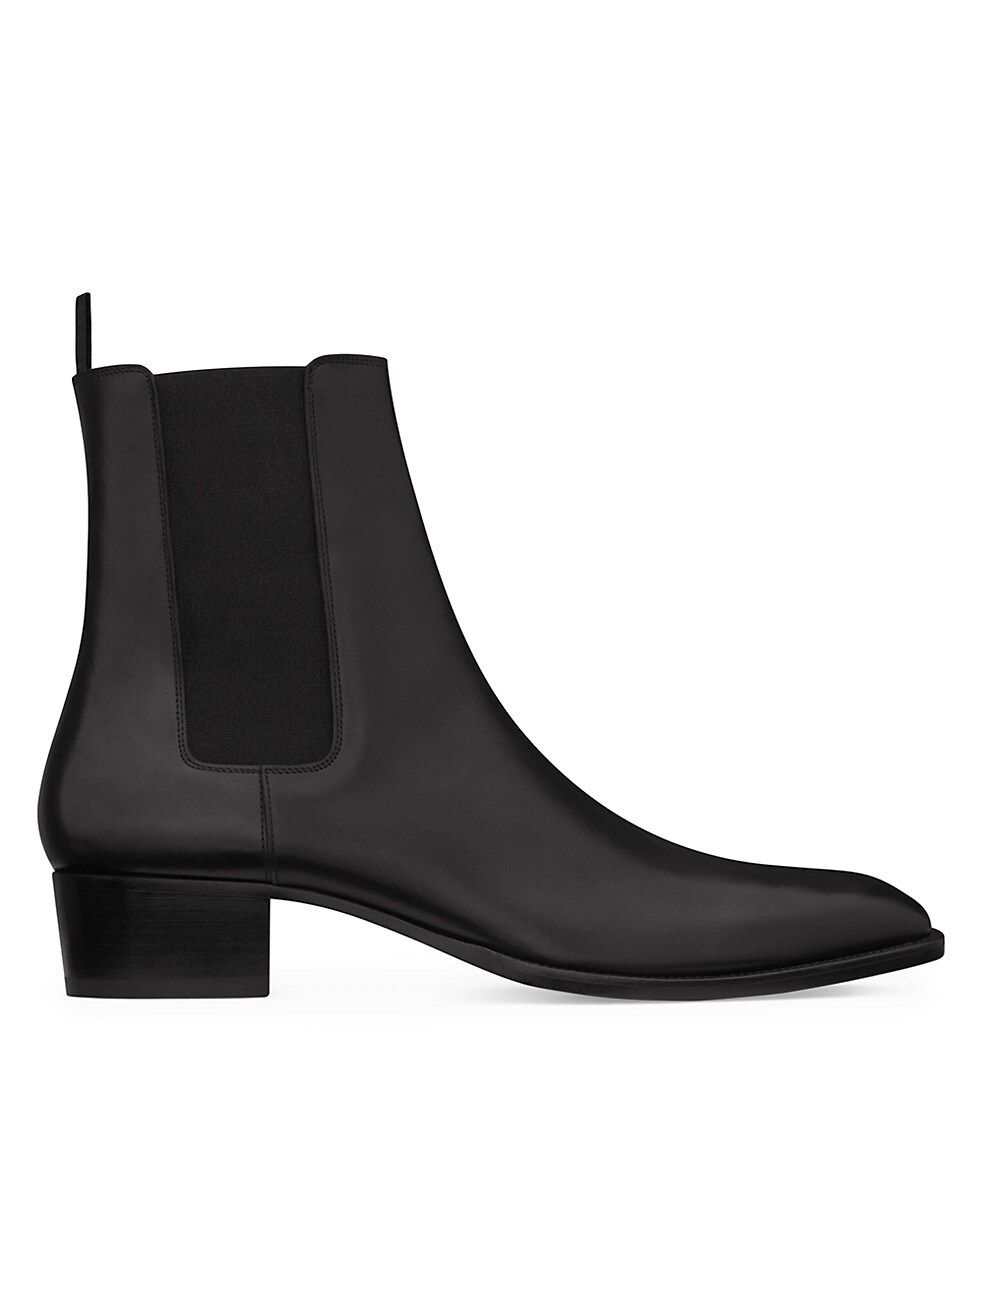 Wyatt Chelsea Boots in Smooth Leather | Saks Fifth Avenue